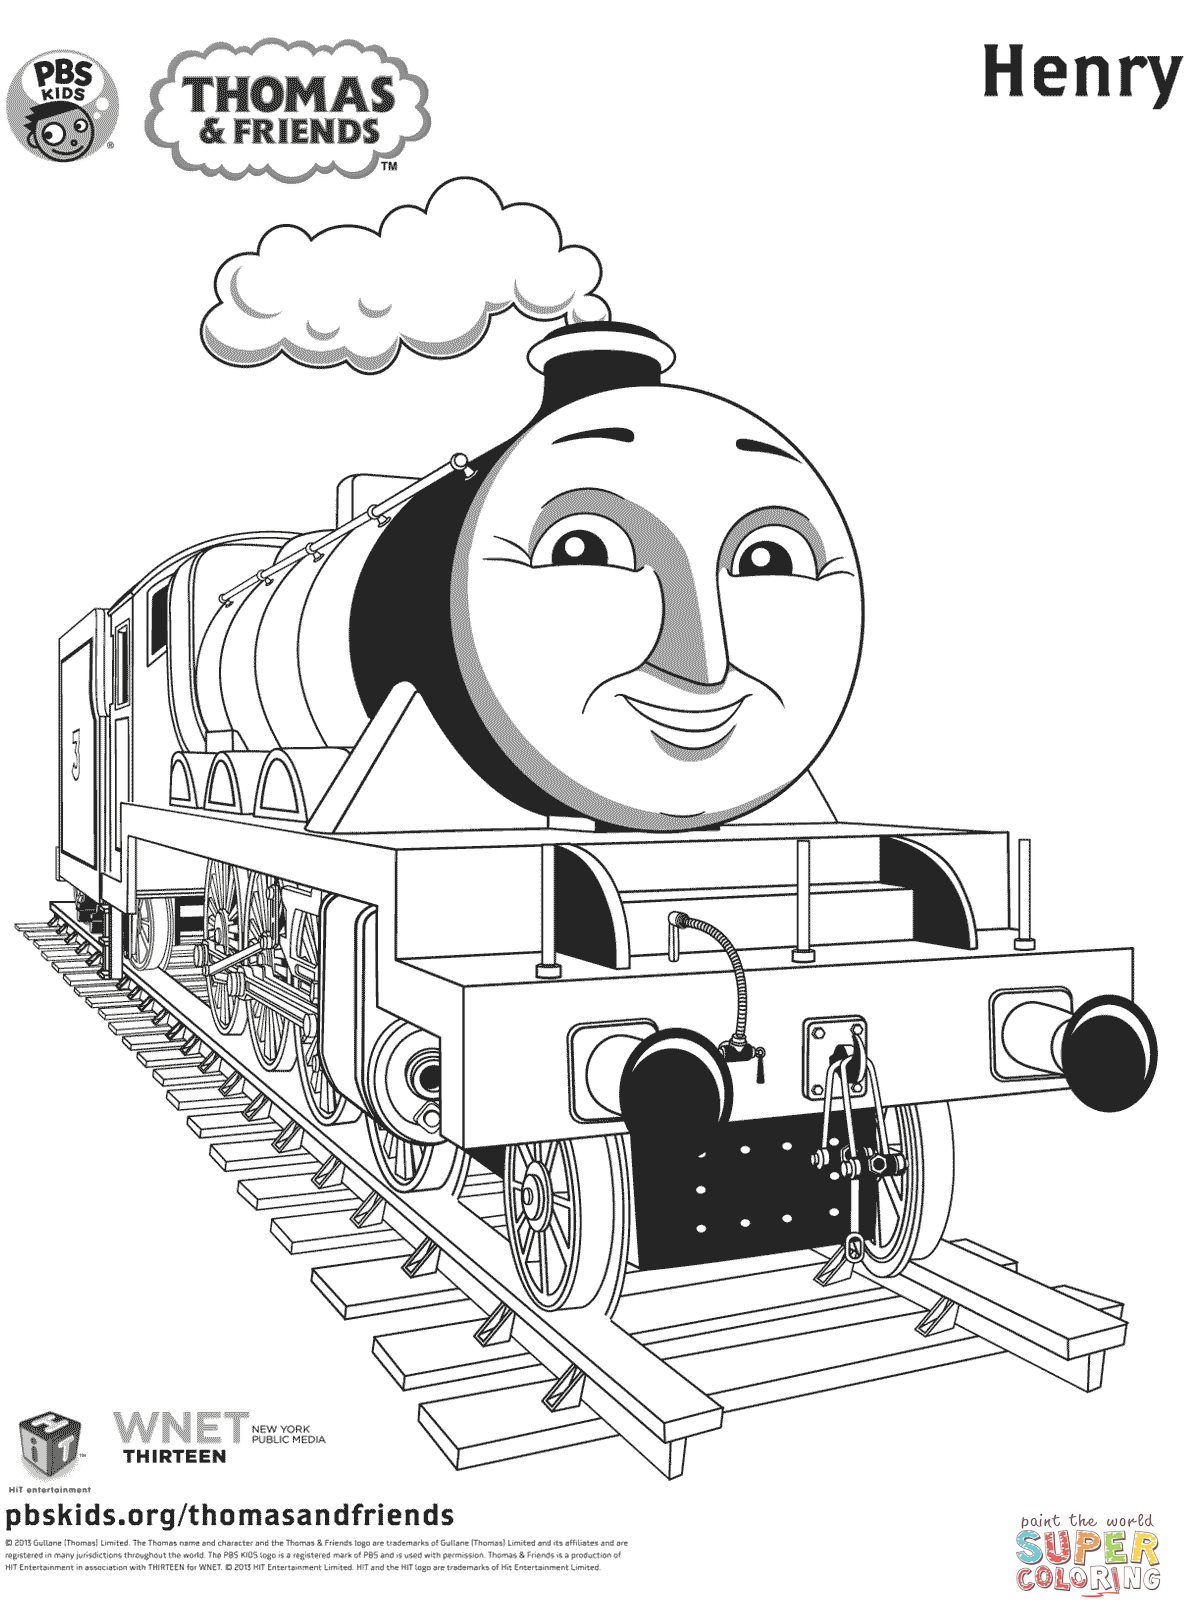 Thomas Coloring Pages Printable Henry From Thomas Friends Coloring Page Free Printable Coloring